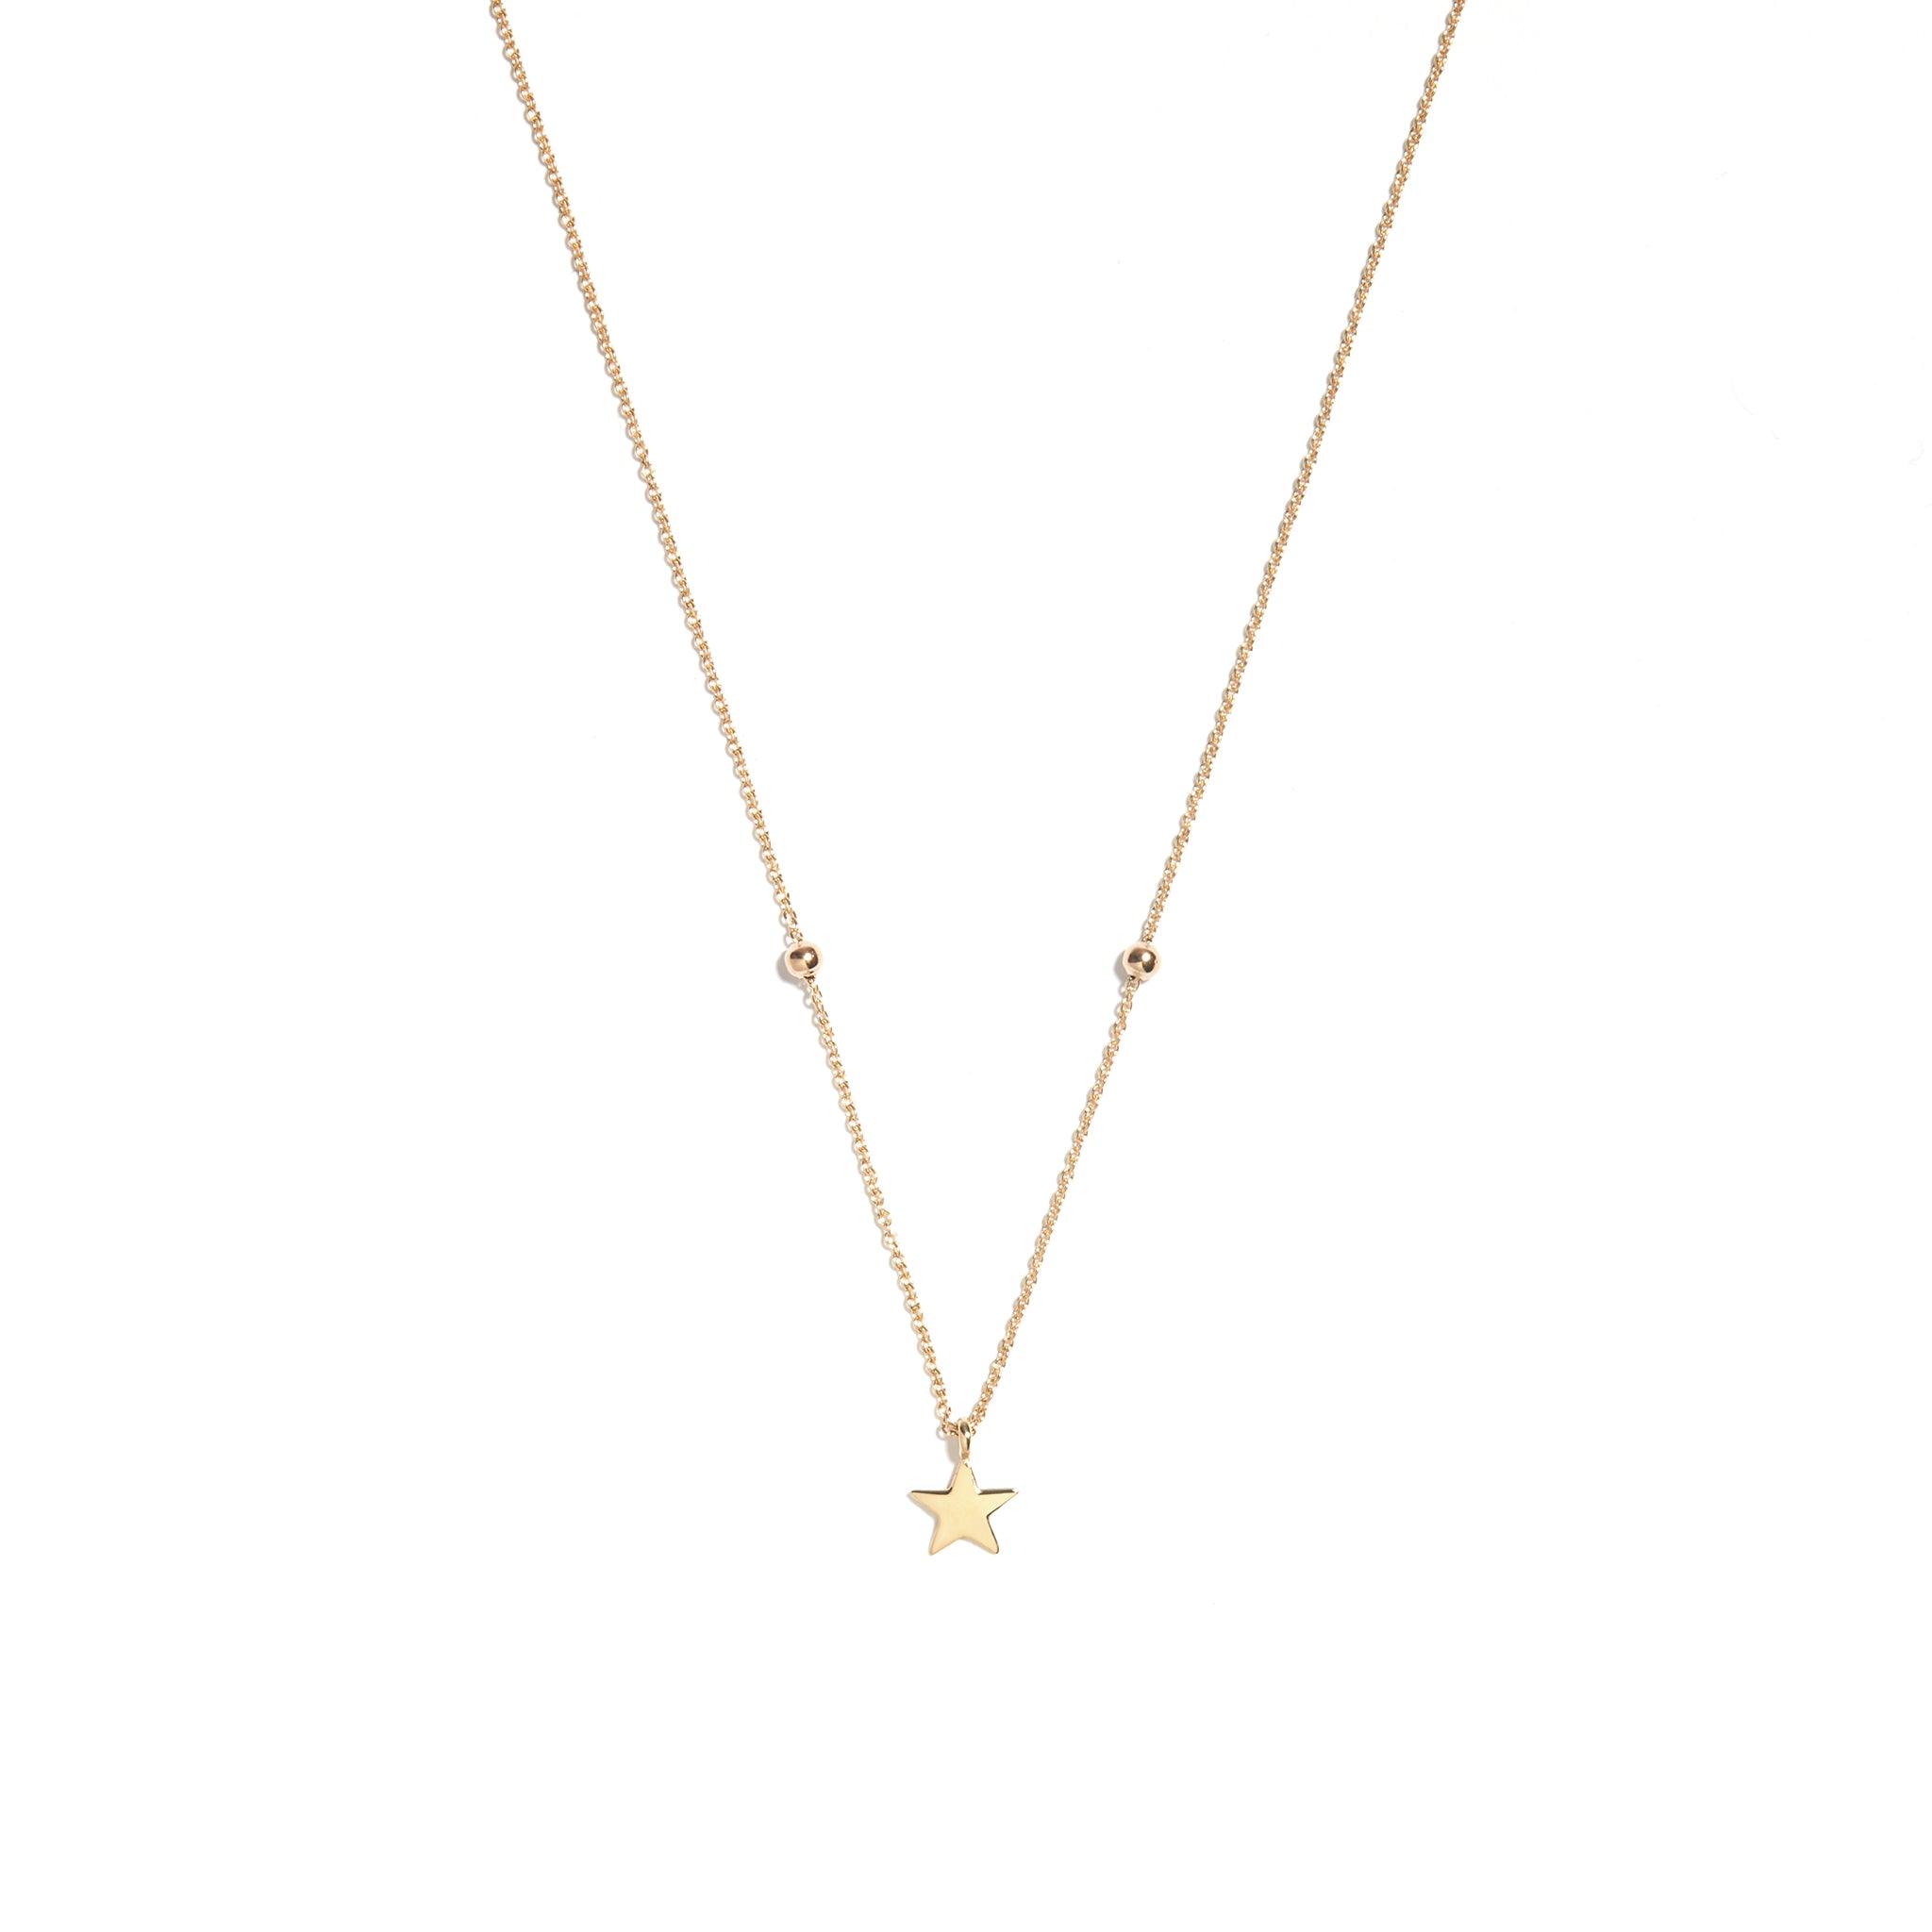 Elevate your look with the 9 carat yellow gold single star pendant. This elegant accessory features a delicate star design, adding a touch of celestial charm to any outfit.